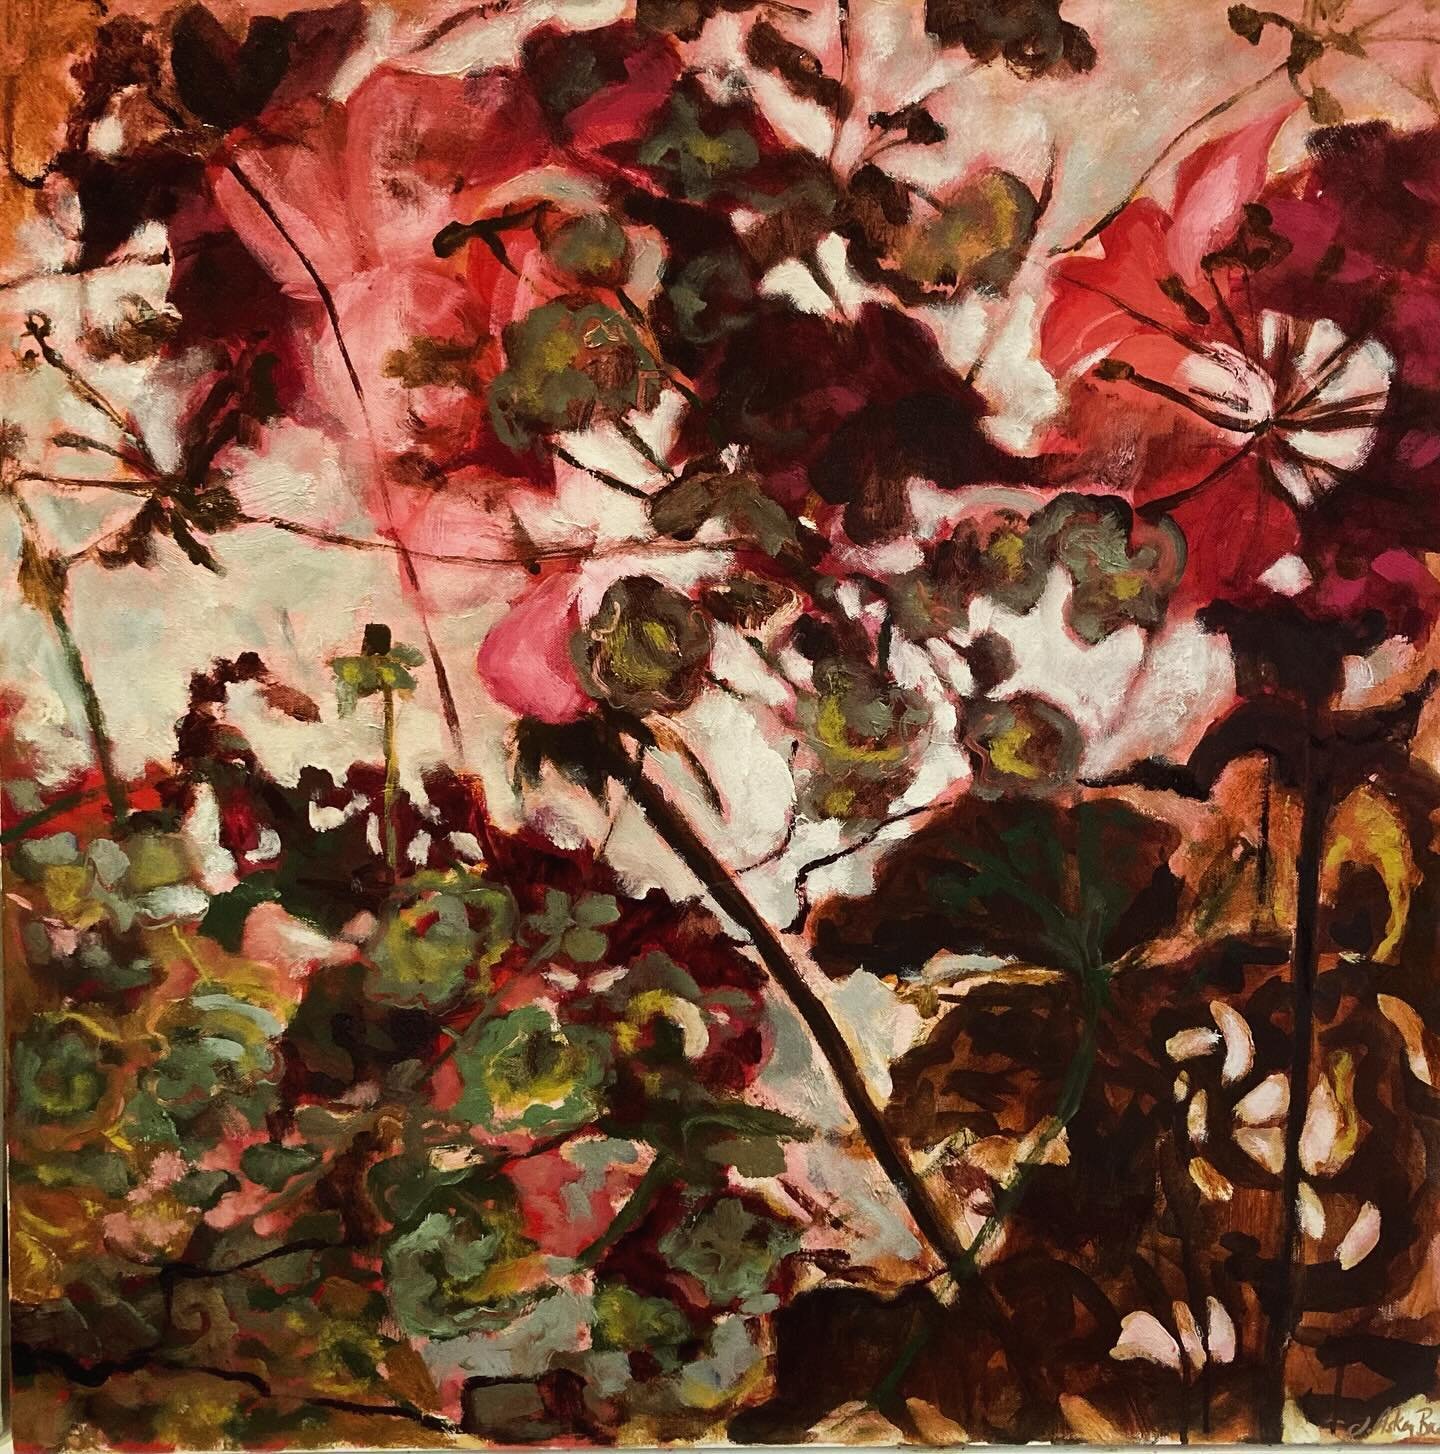 Gardening days getting last years geraniums out from storage, loved the colours the mix of new growth, old paper thin leaves, dried flowers and a tangle of stems. Just had to paint them, sometimes the unplanned paintings are the best. 
80 x 80cm oil 